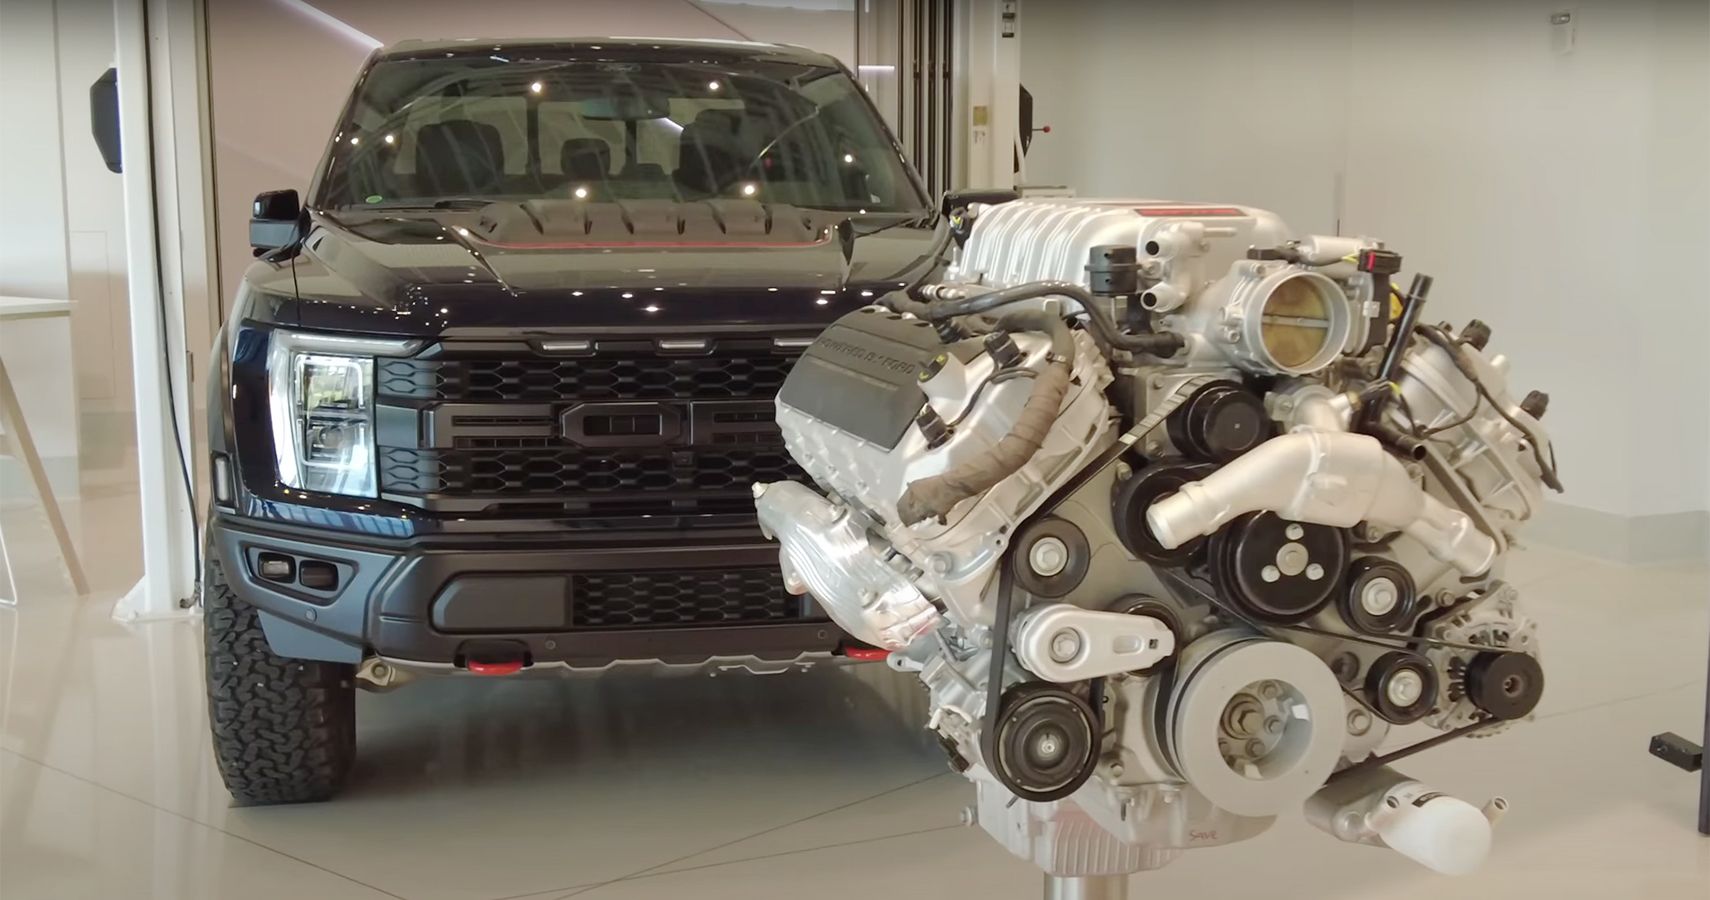 Ford F-150 Raptor R and Supercharged Ford V8 Engine